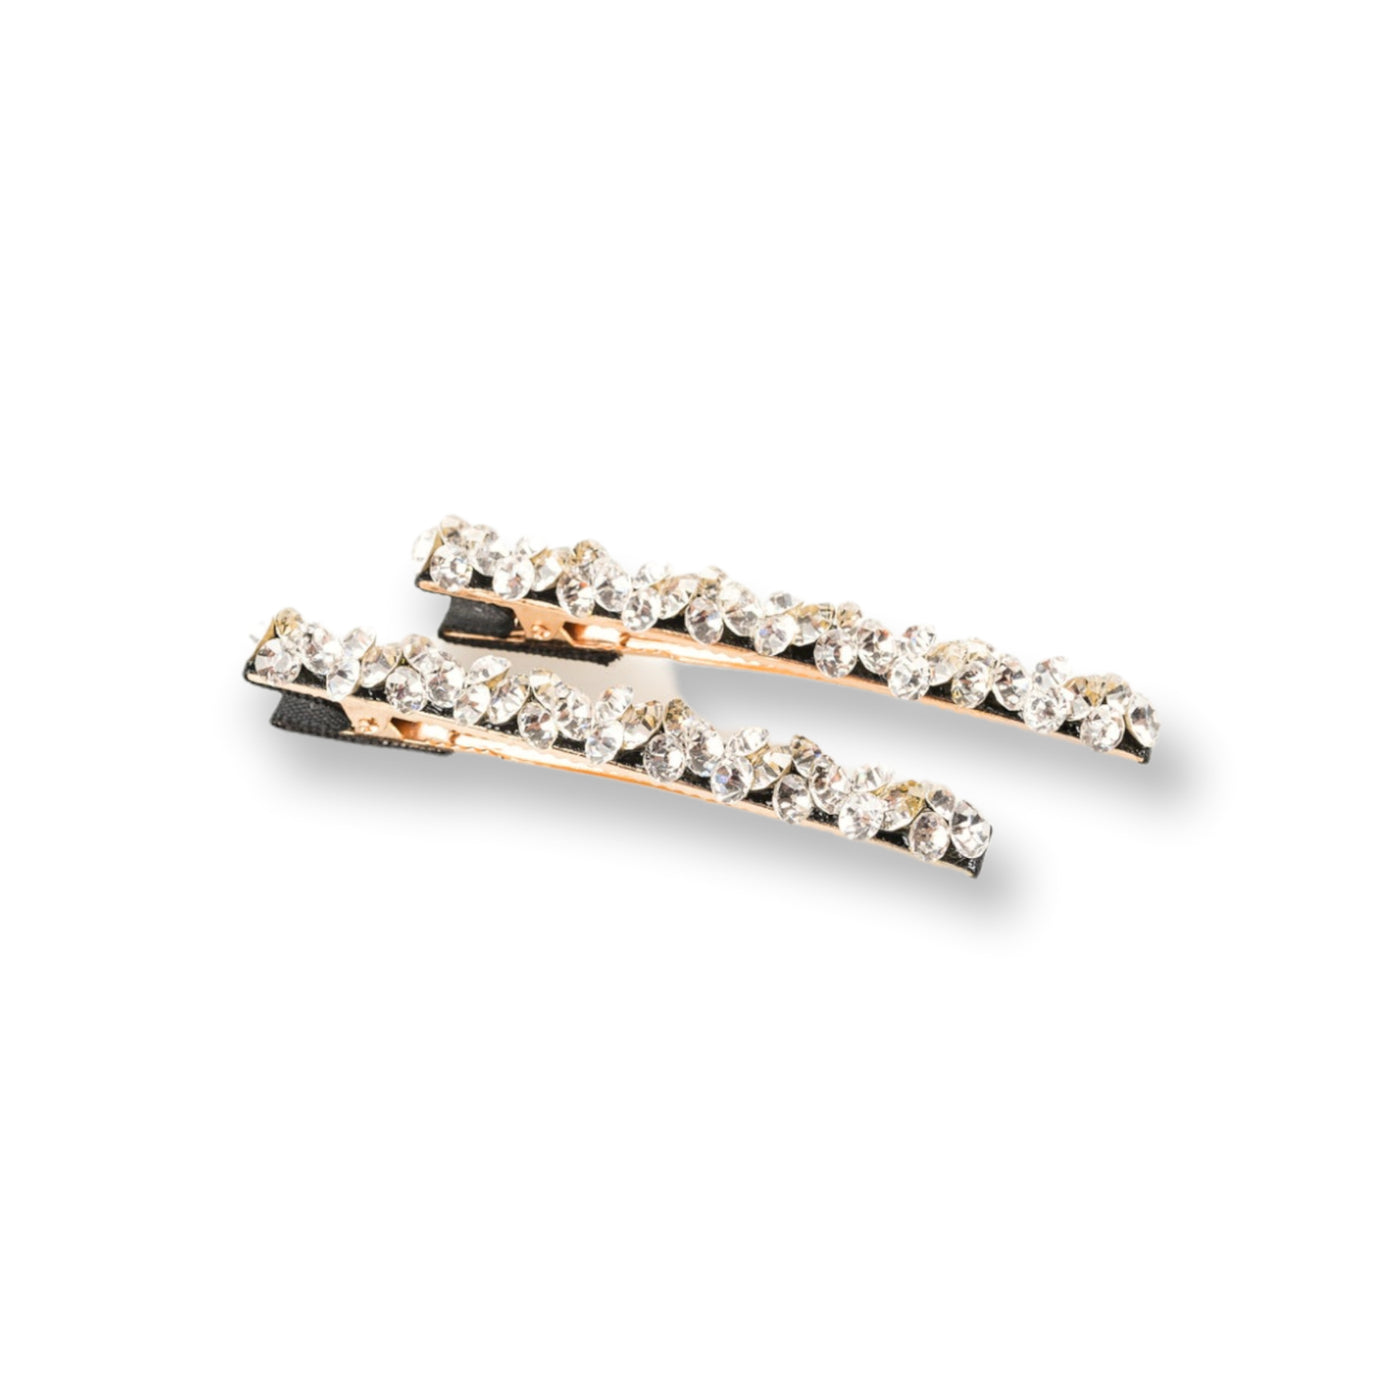 Cluster crystal gold barrettes are the perfect accessory for everyday modest dresses. 